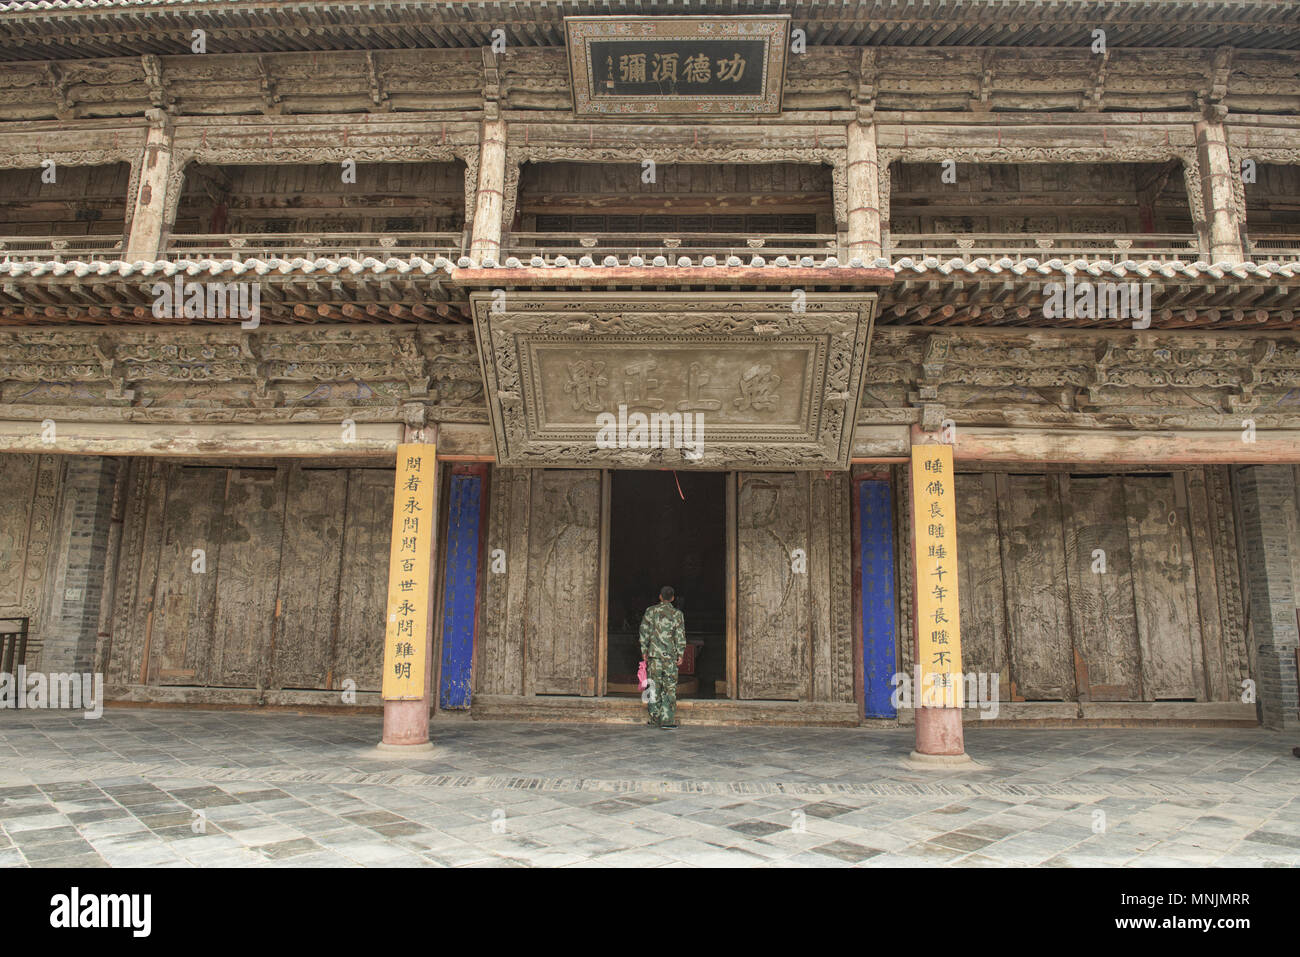 Entrance to the Dafo Temple (Great Buddha Temple), dating from 1100, Zhangye, Gansu, China Stock Photo